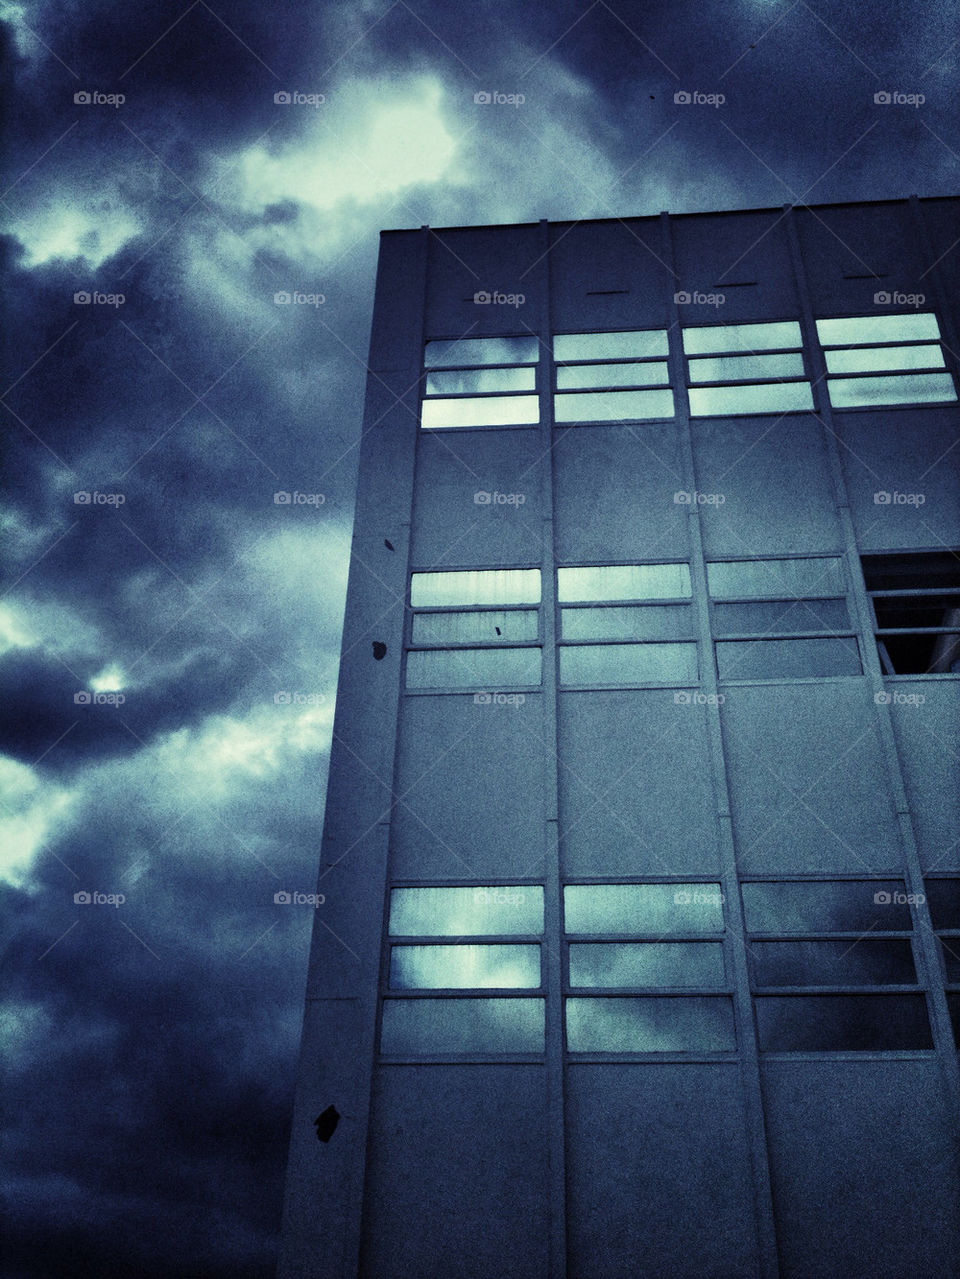 Reflection of storm clouds in the windows of an office building